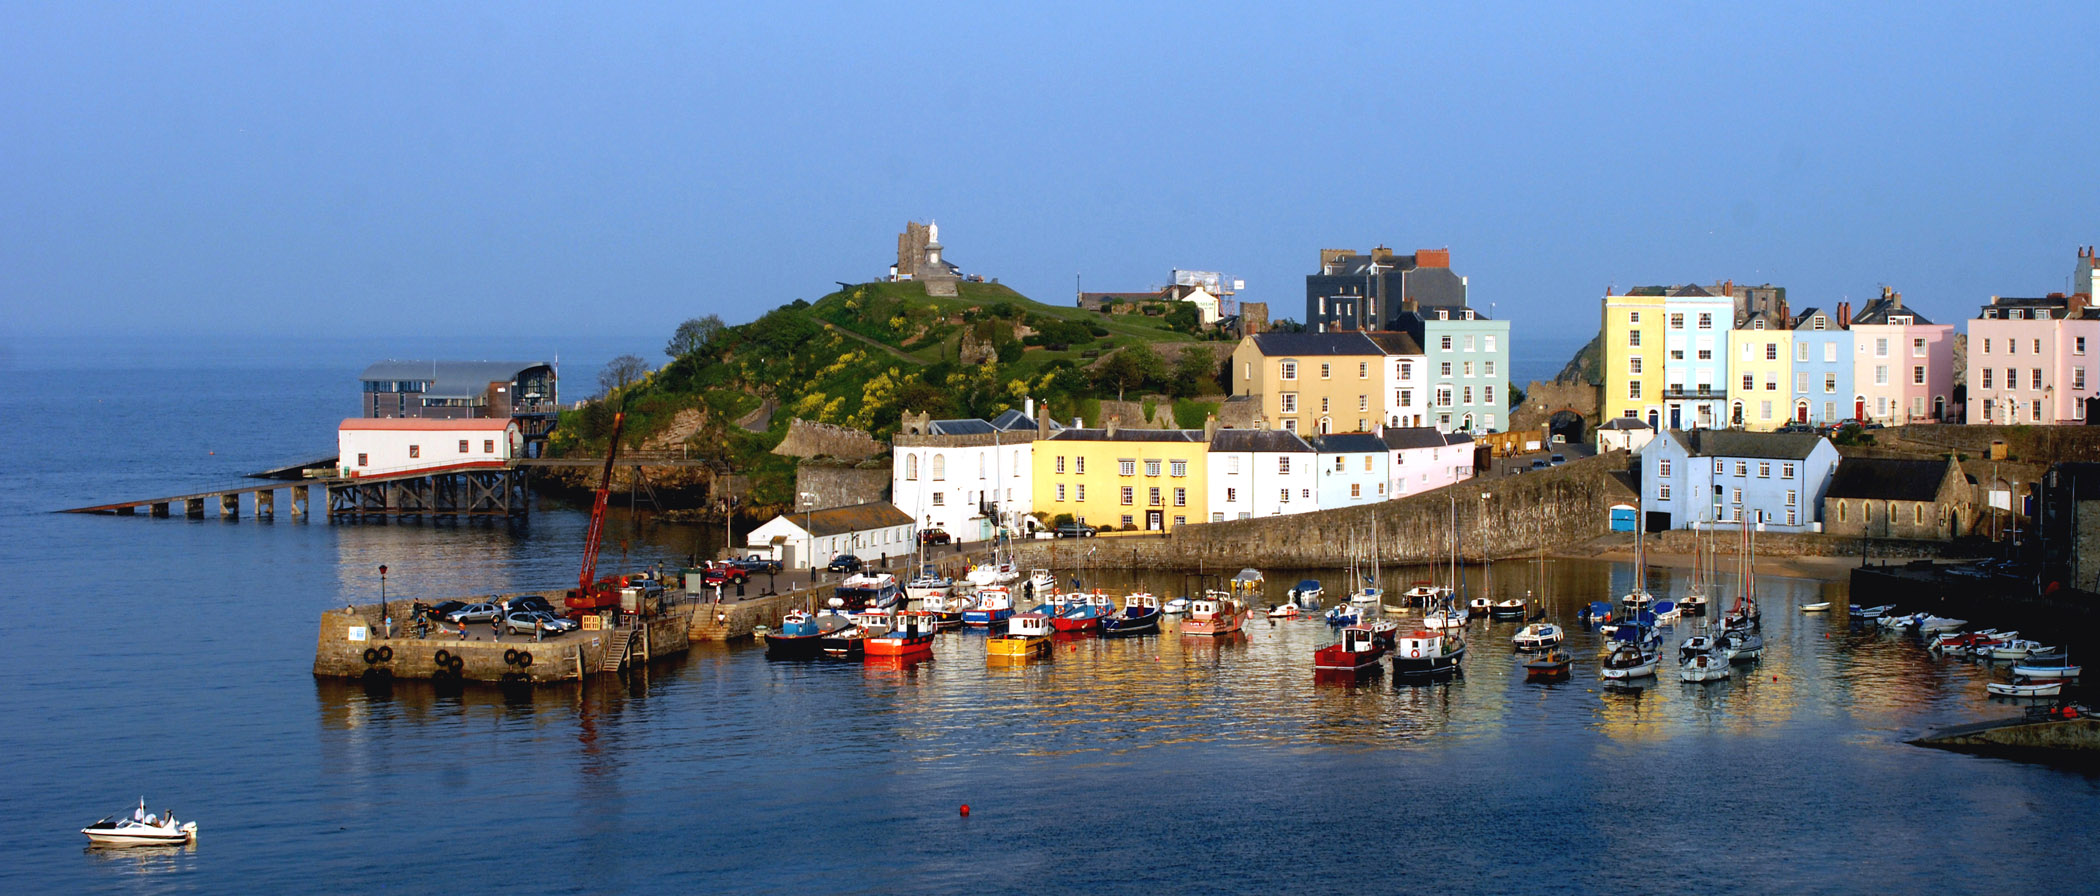 Pictures Of Tenby 14